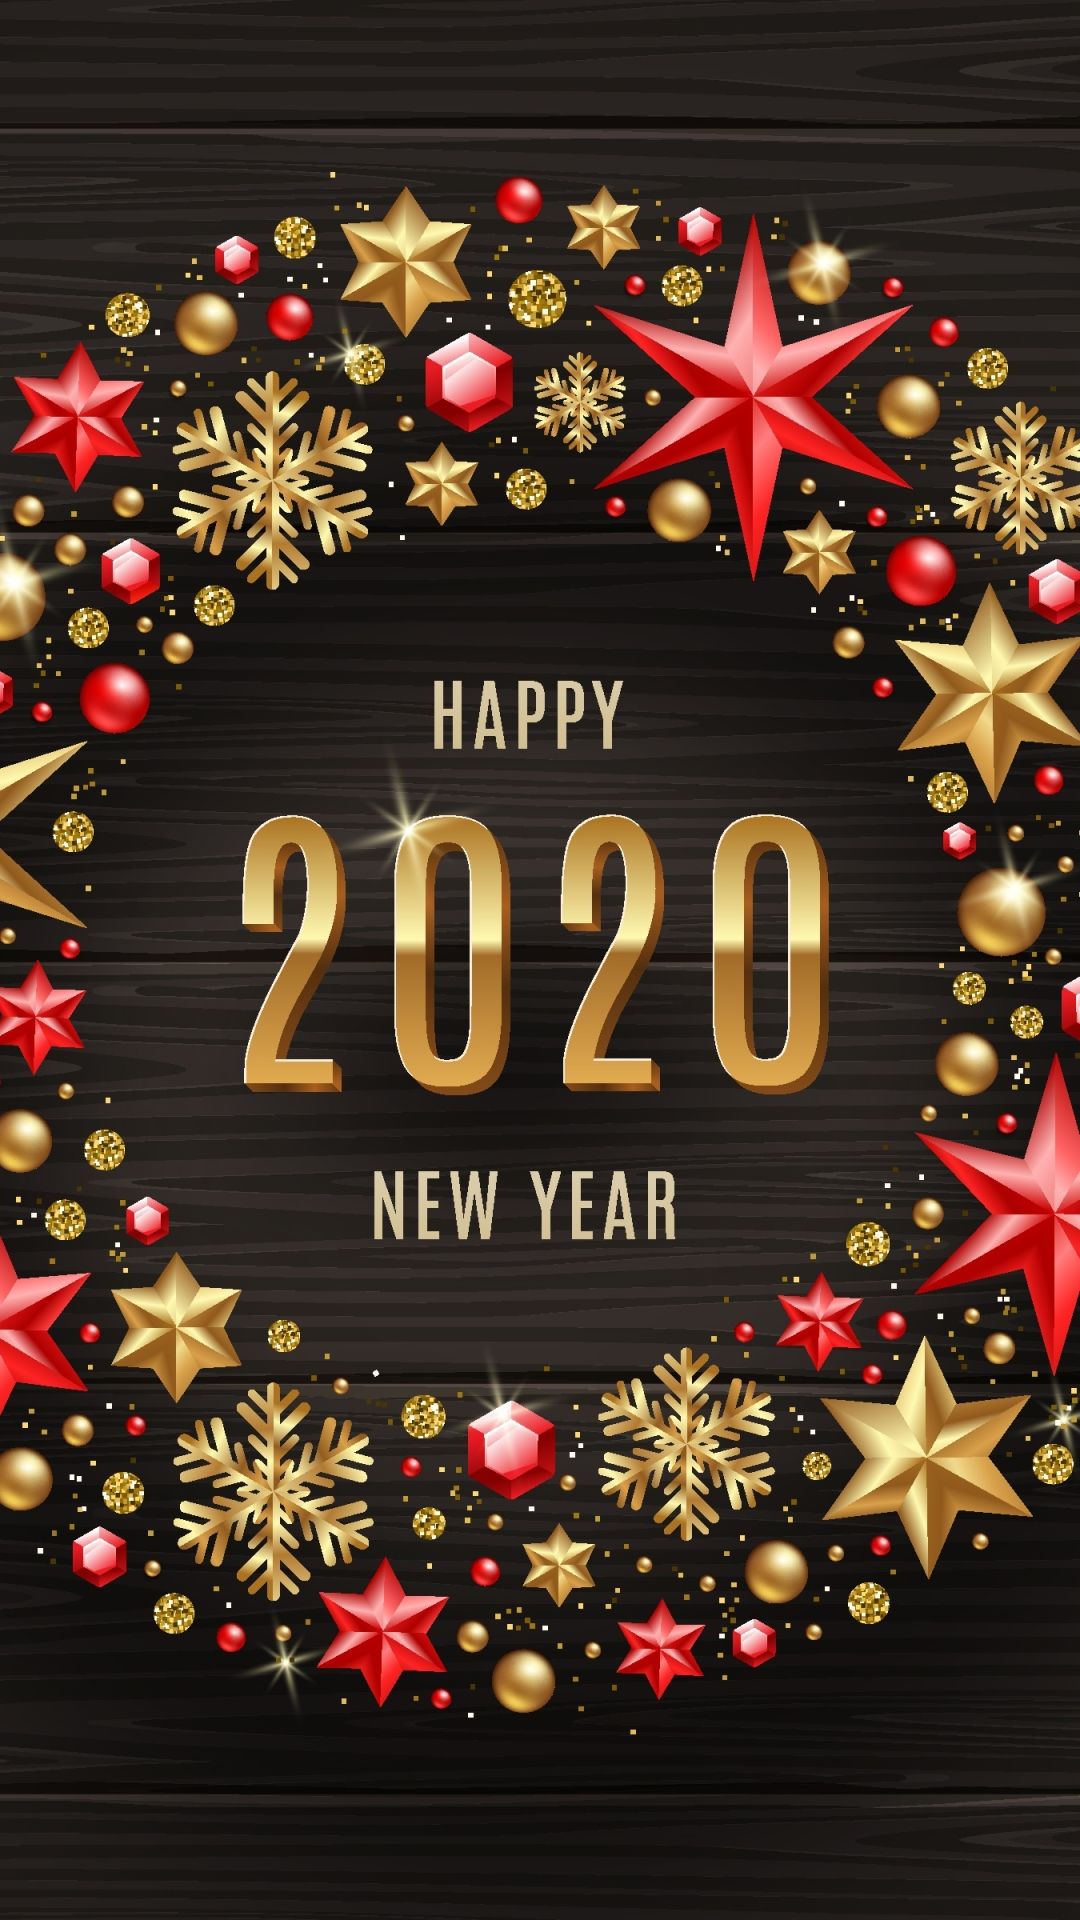 Download Happy New Year 2020 Wishes Wallpaper for your Android 1080x1920